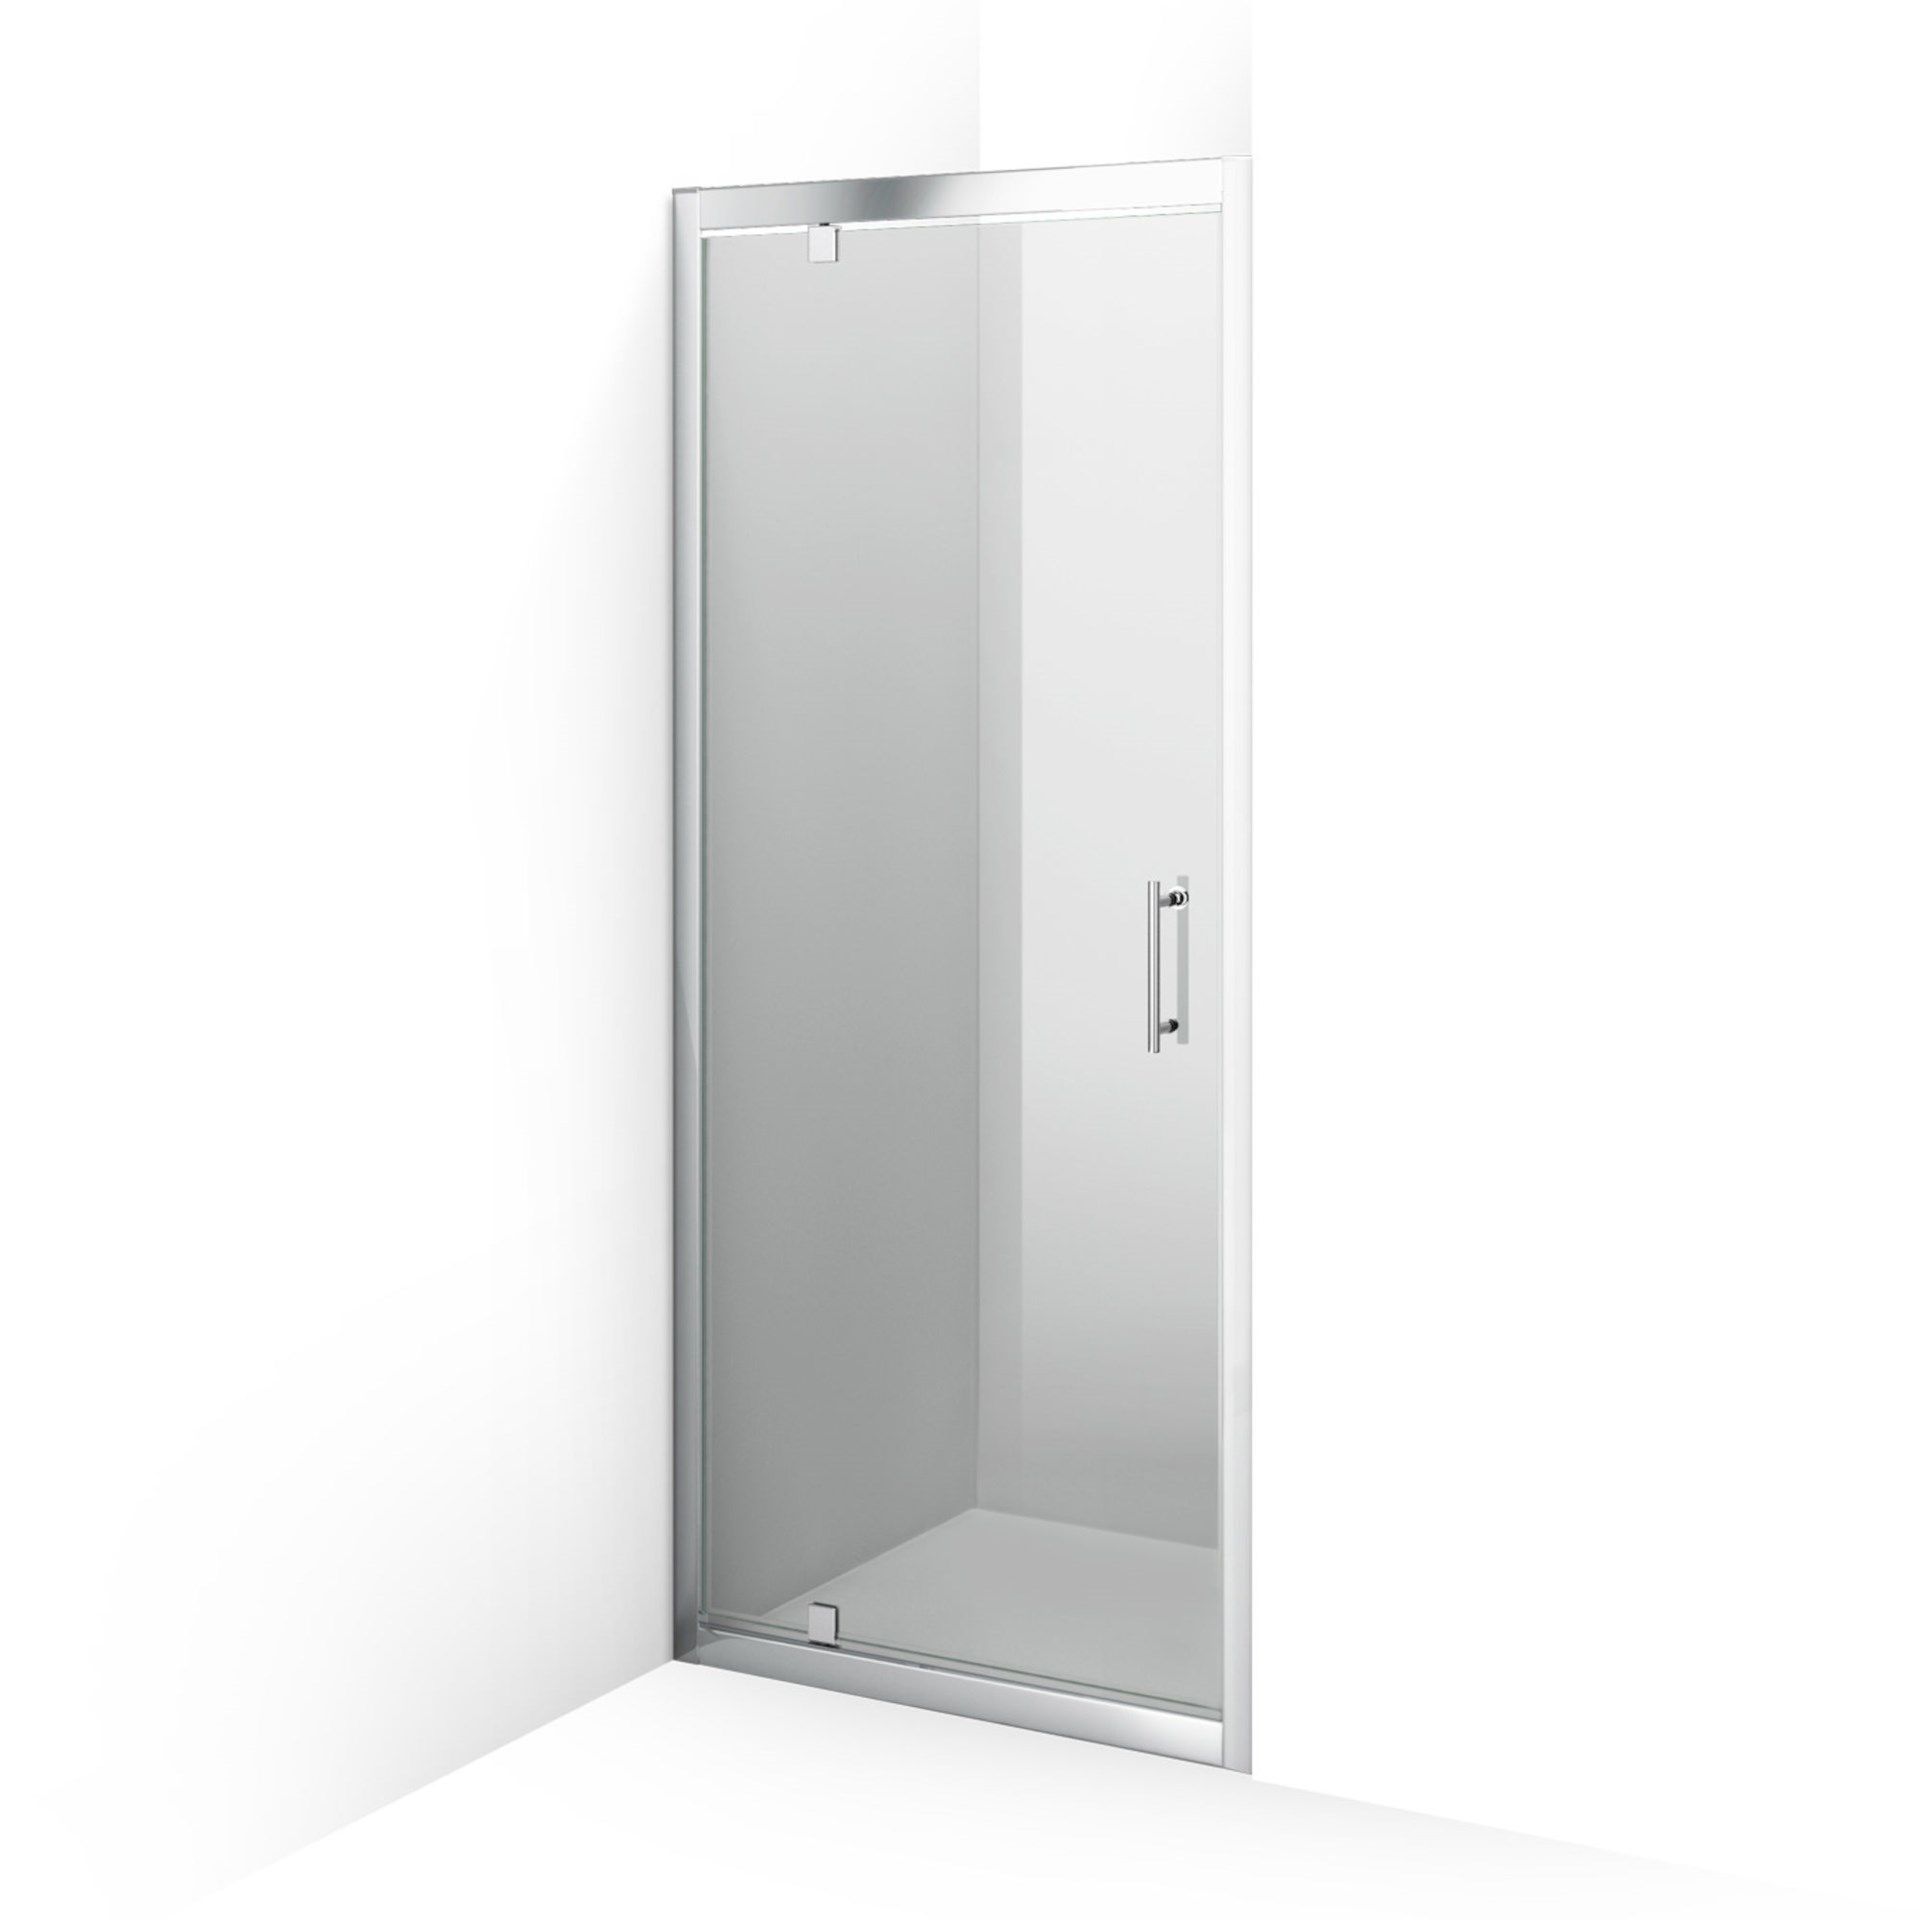 NEW & BOXED Twyfords 700mm - 6mm - Premium Pivot Shower Door. RRP £299.99.8mm Safety Glass Ful... - Image 2 of 2